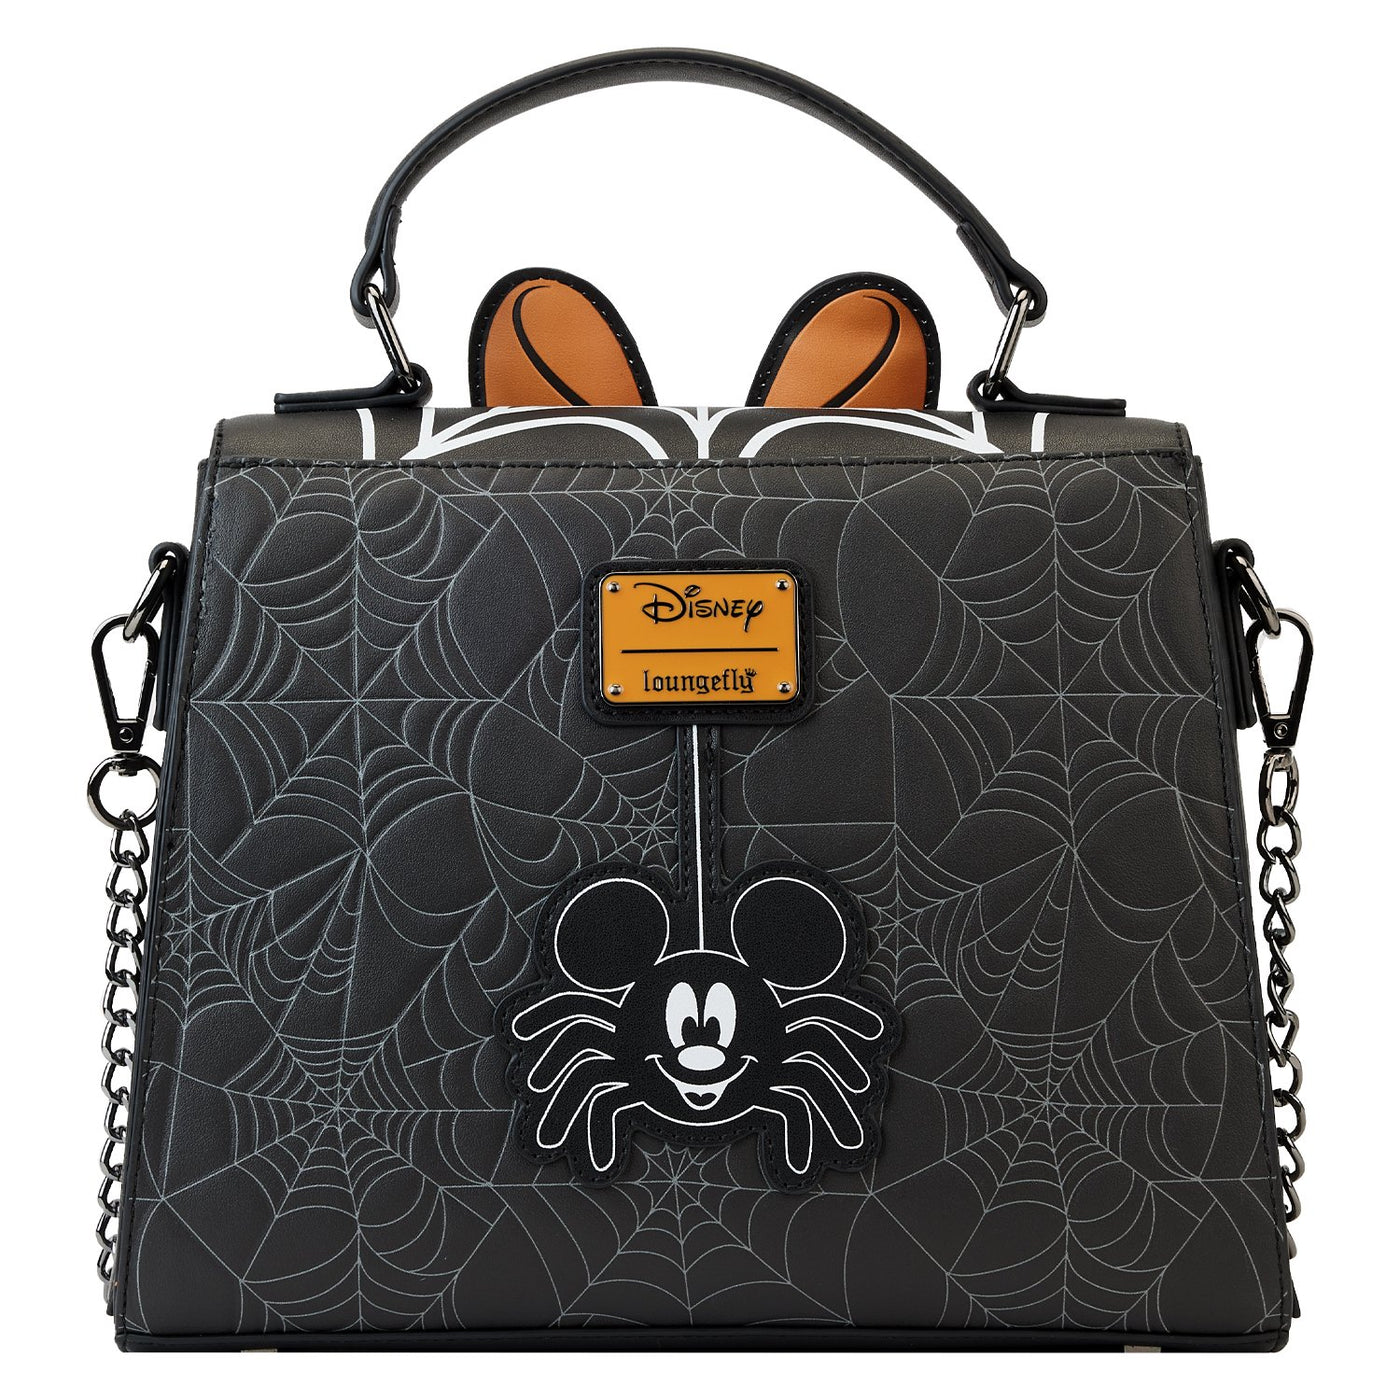 Loungefly Disney Minnie Mouse Spider Crossbody - Back